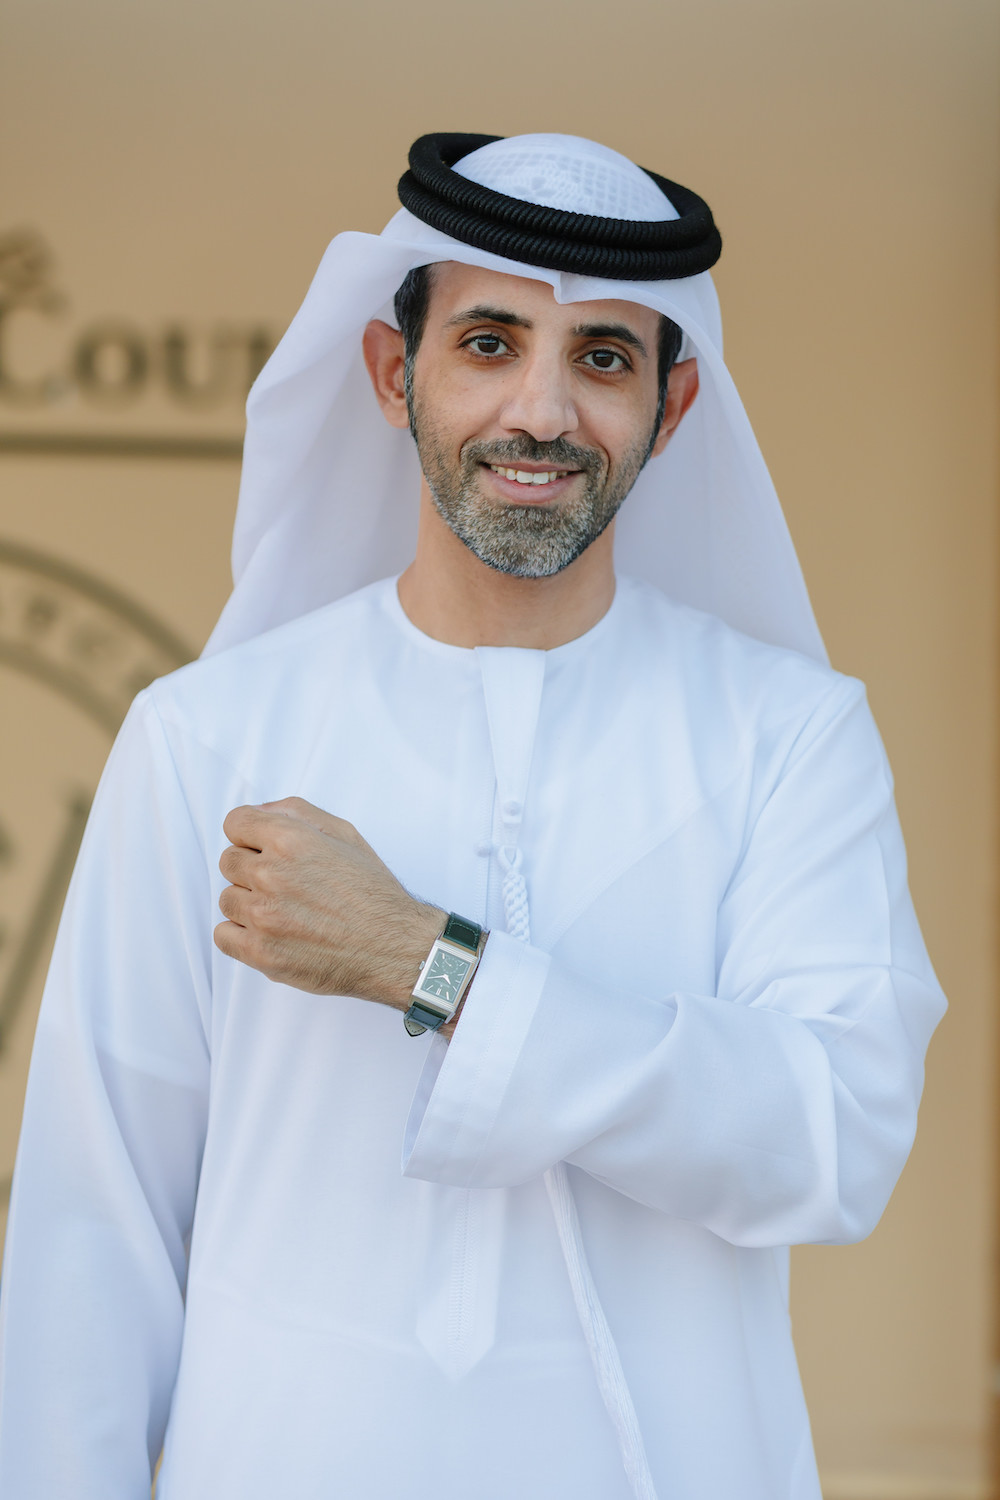 Interview Malek Easa Founder of The Emirates Watch Club